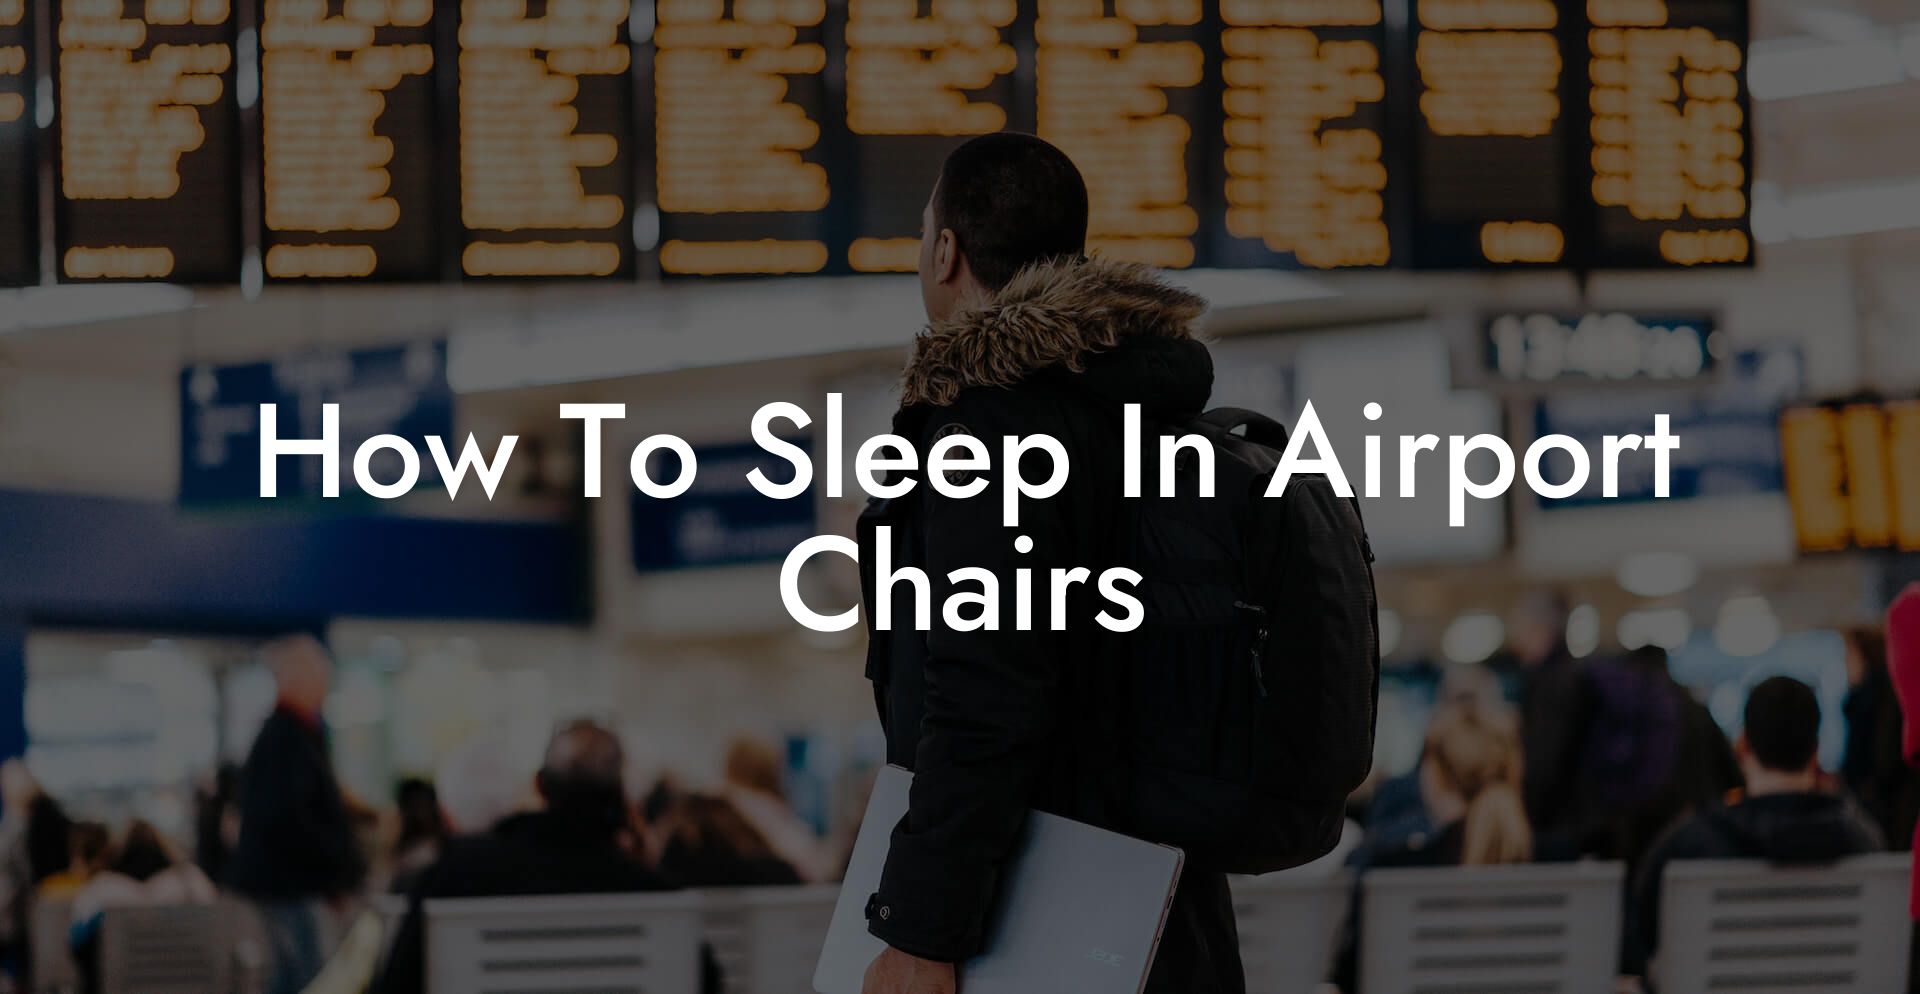 How To Sleep In Airport Chairs